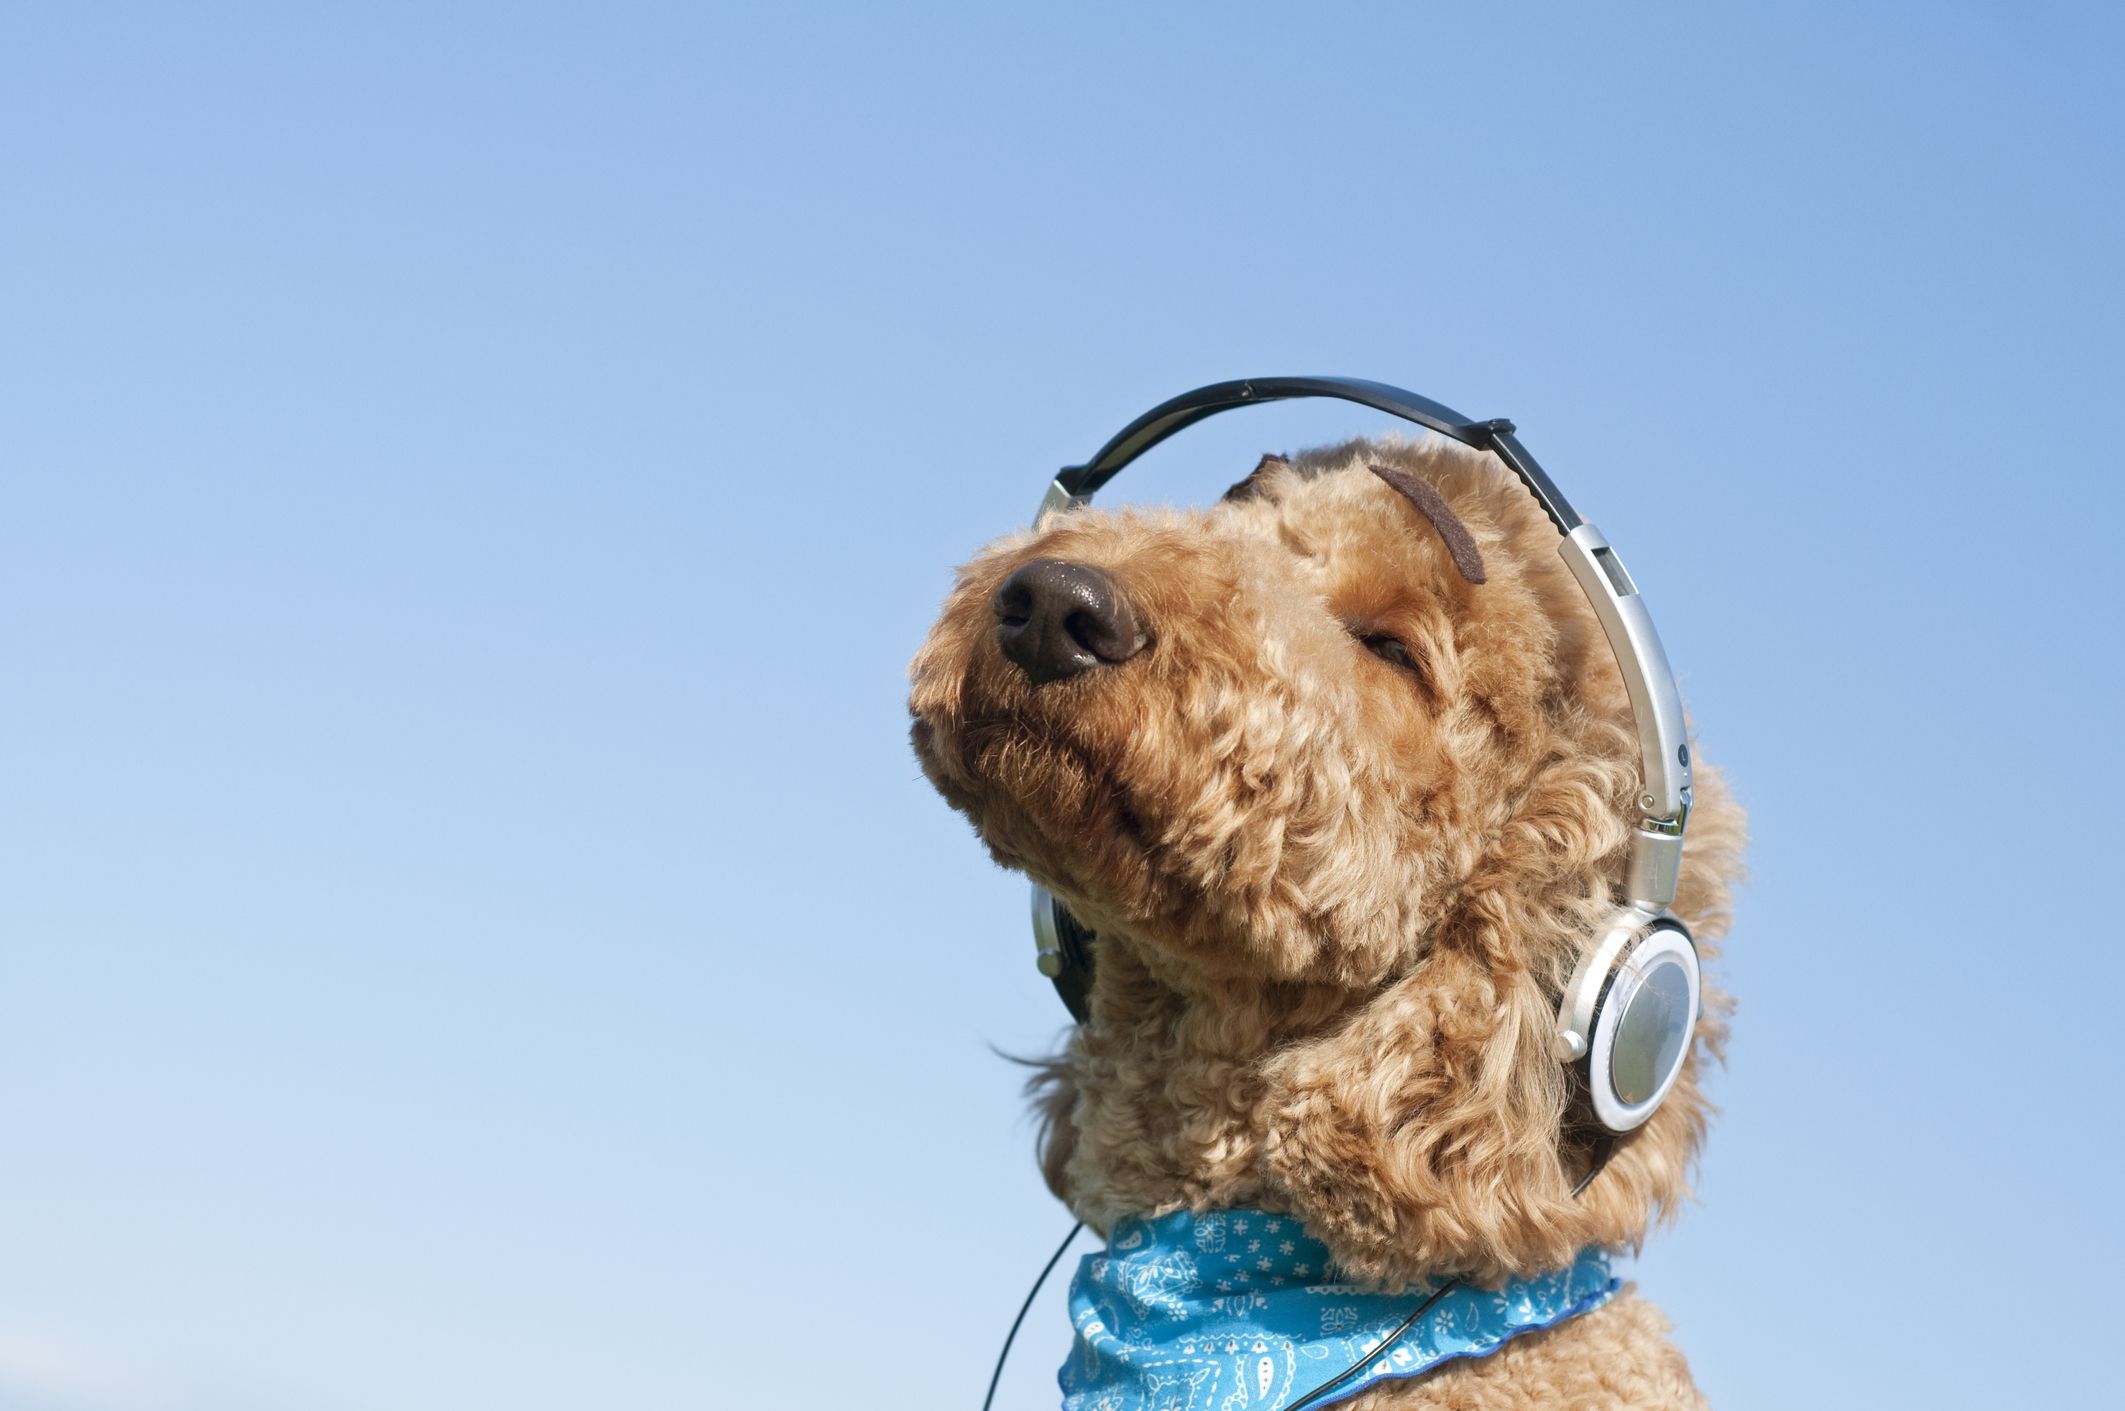 dog music relax your dog